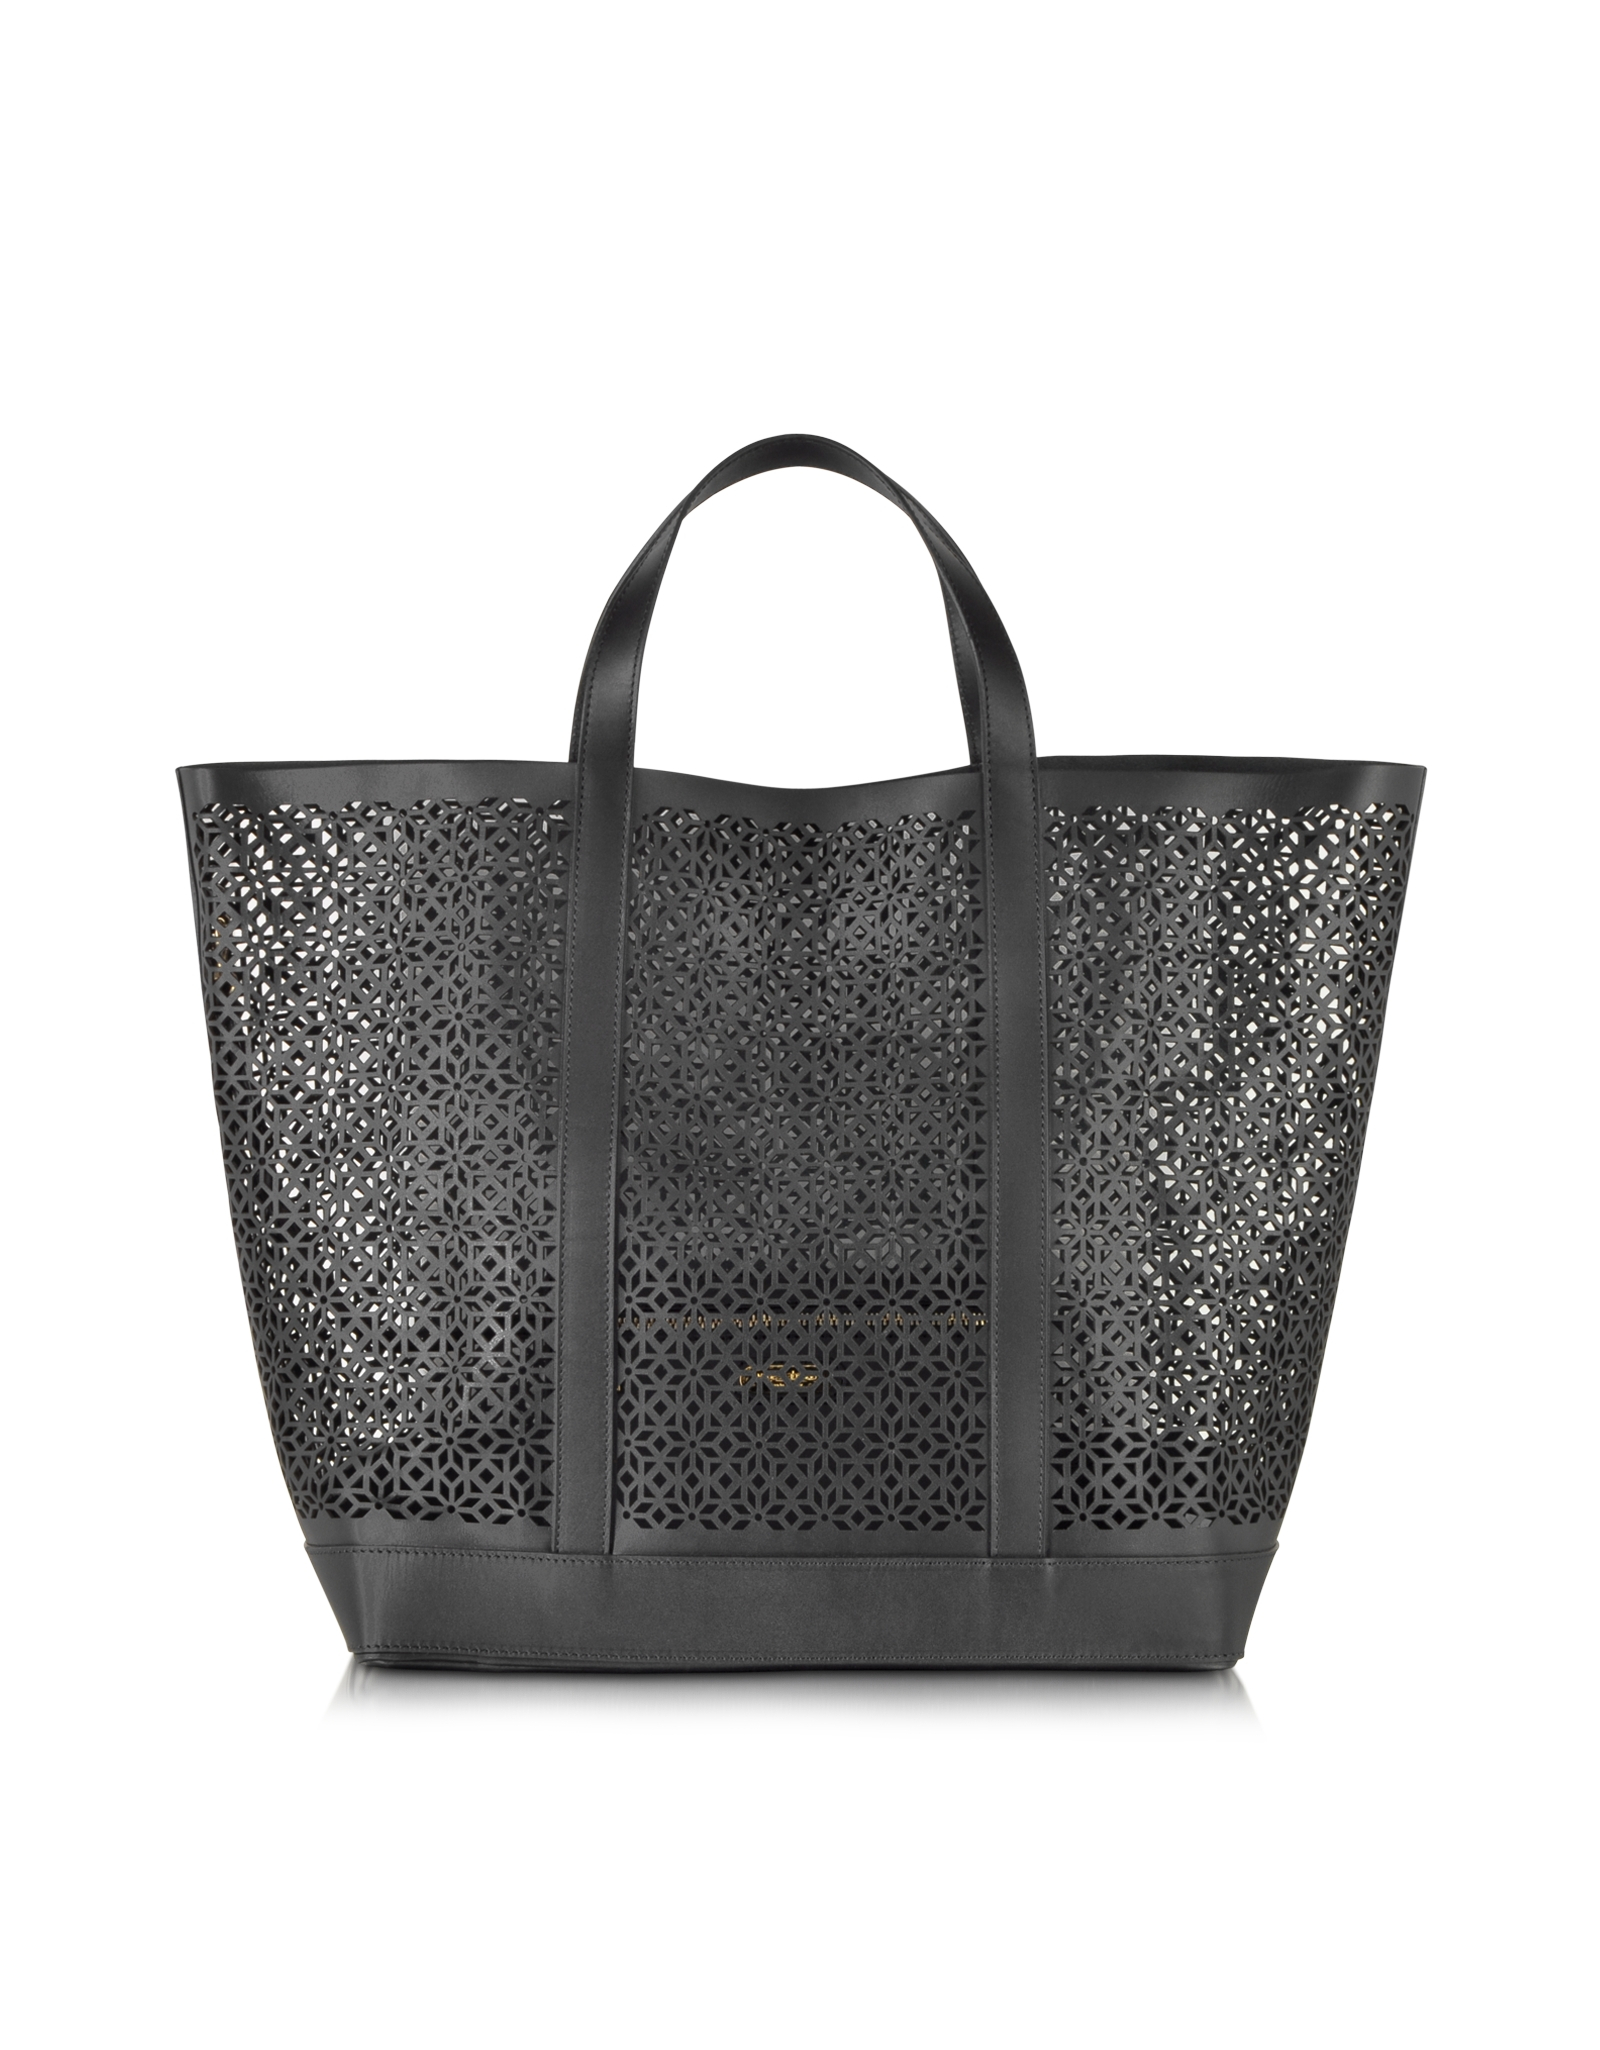 Lyst - Vanessa Bruno Le Cabas Large Perforated Leather Tote in Black